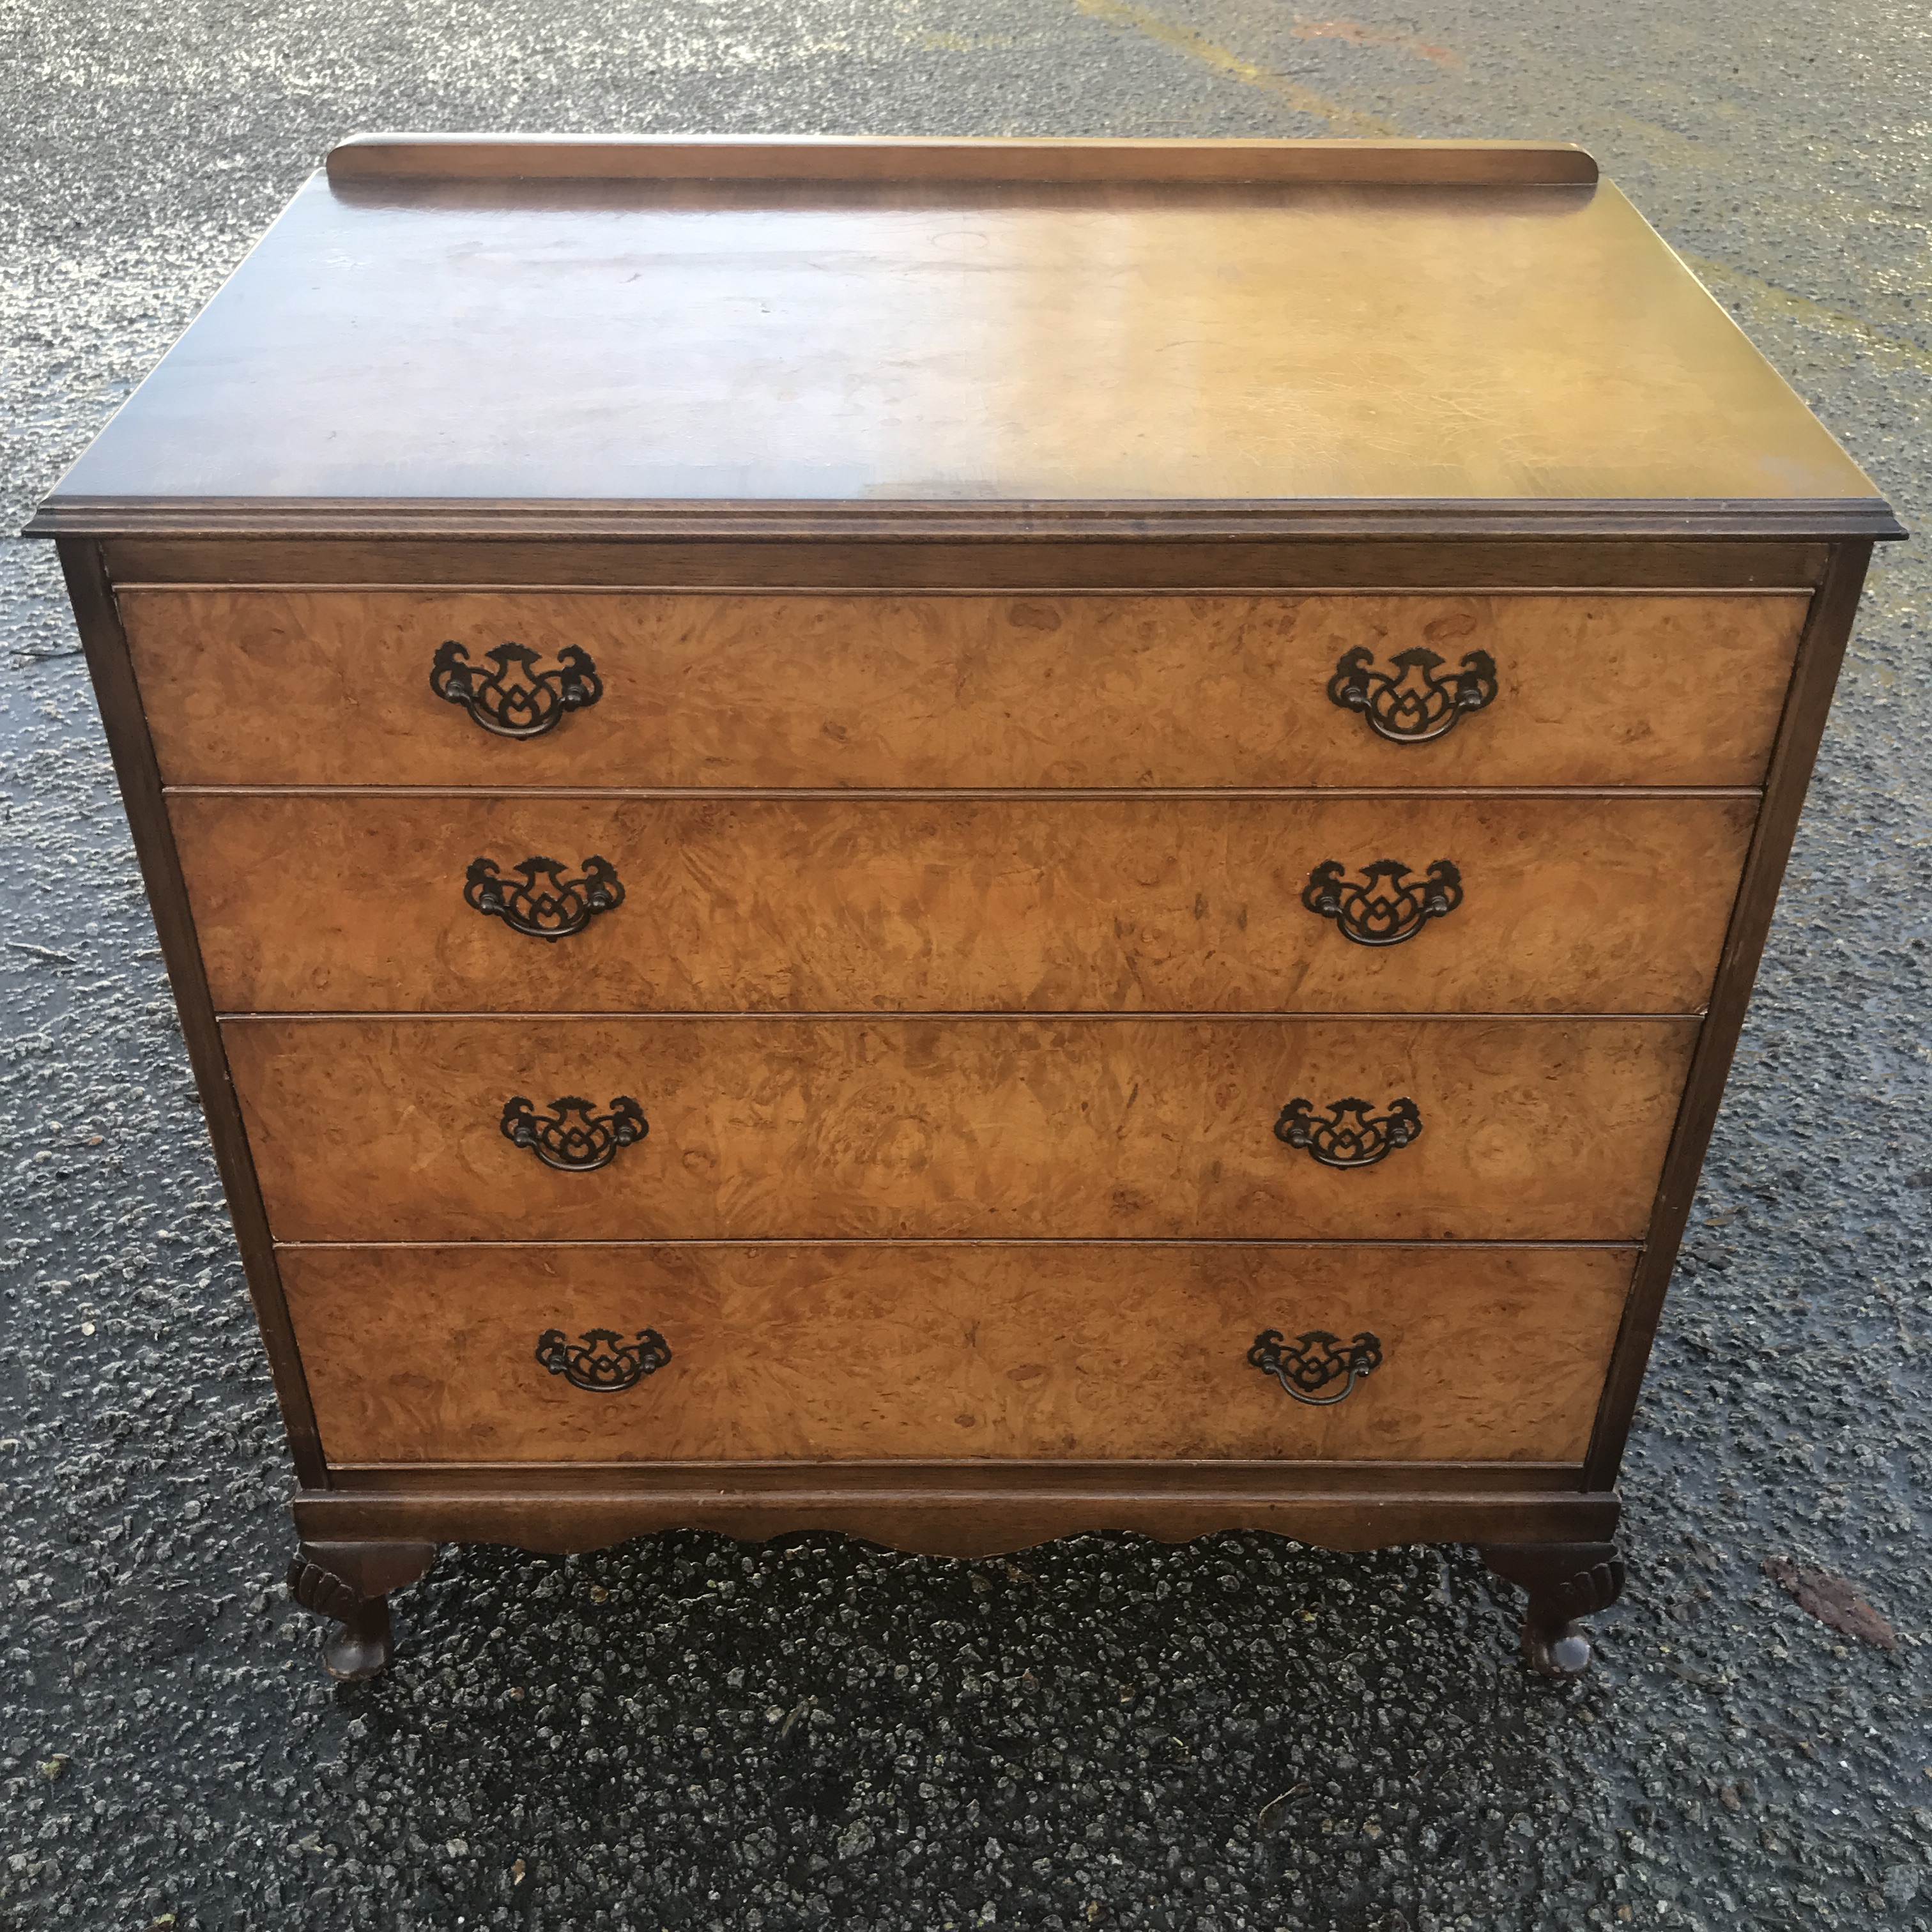 QUEEN ANNE STYLE BURR WALNUT CHEST OF DRAWERS